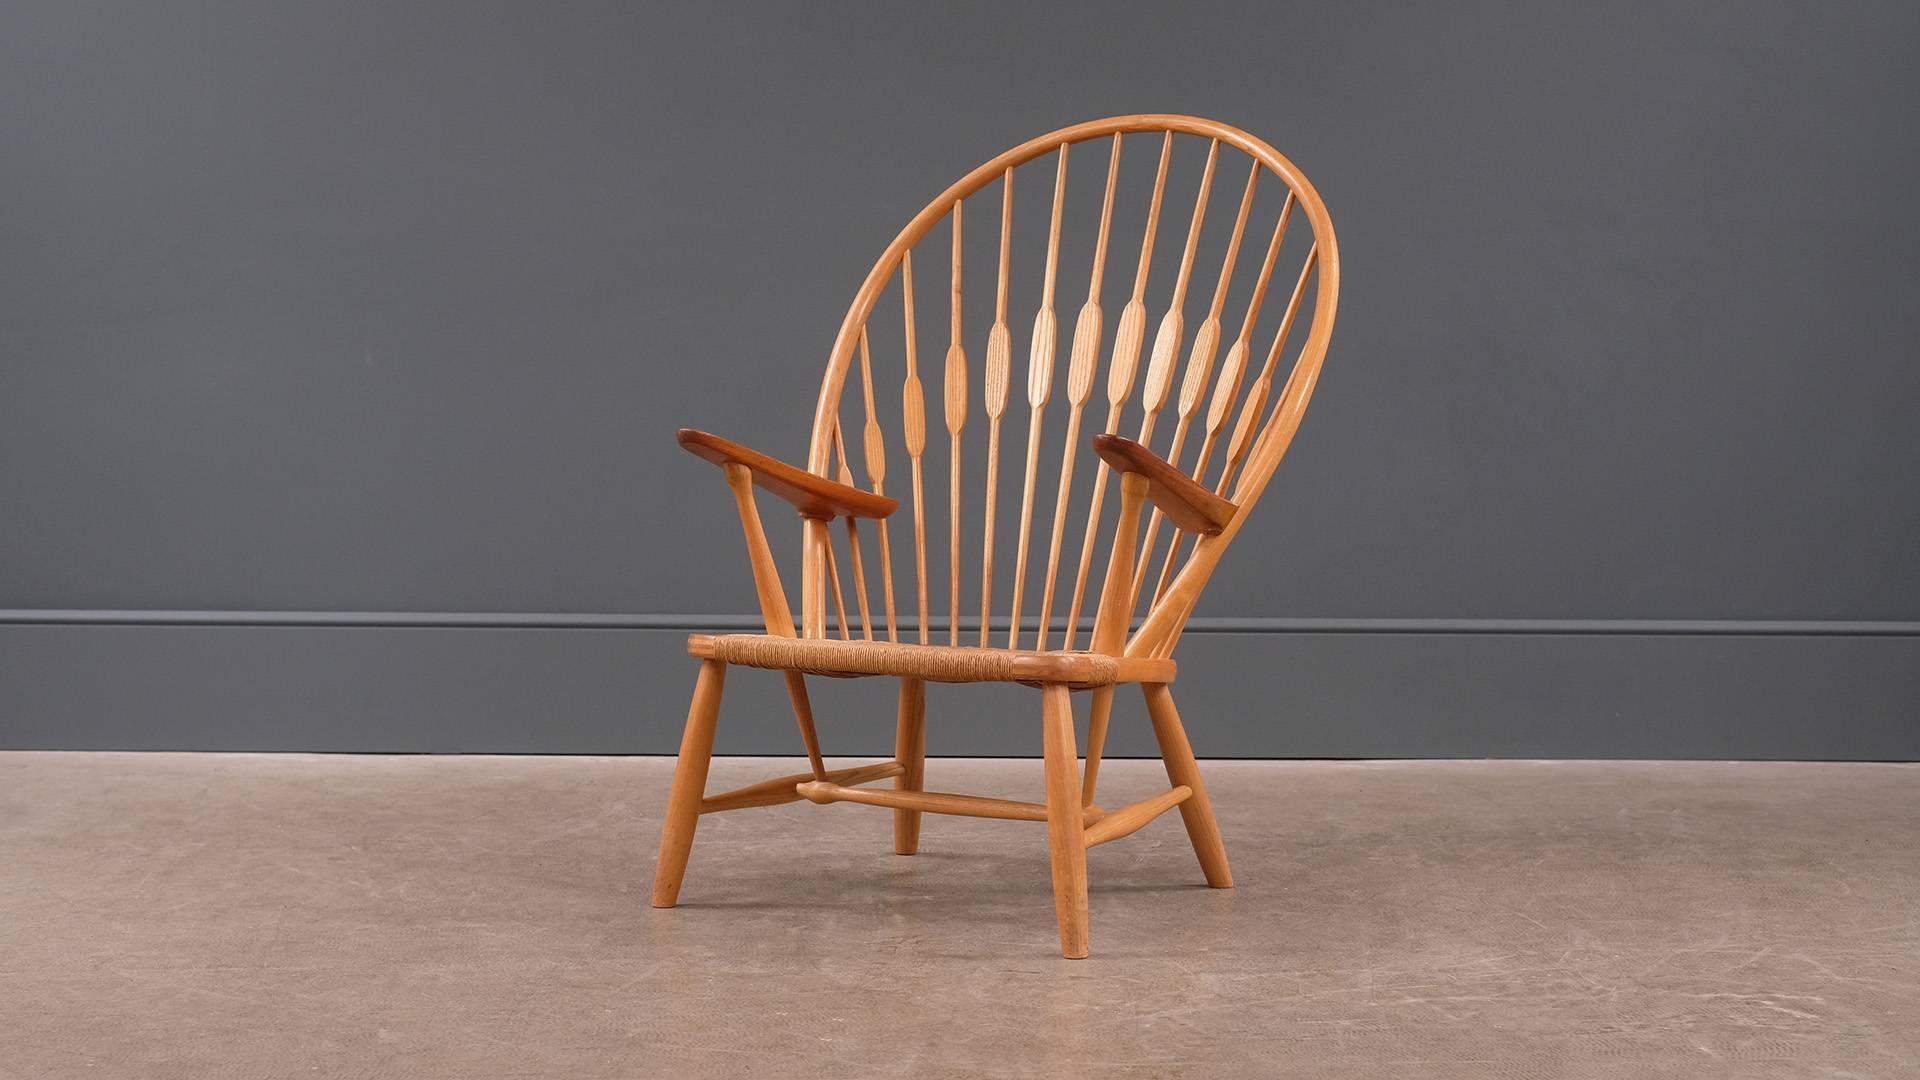 Amazing peacock chair designed by Hans Wegner, Denmark. Fantastic original early example produced by cabinet maker Johannes Hansen. Solid ash frame with contrasting teak arms. Rare and great piece.